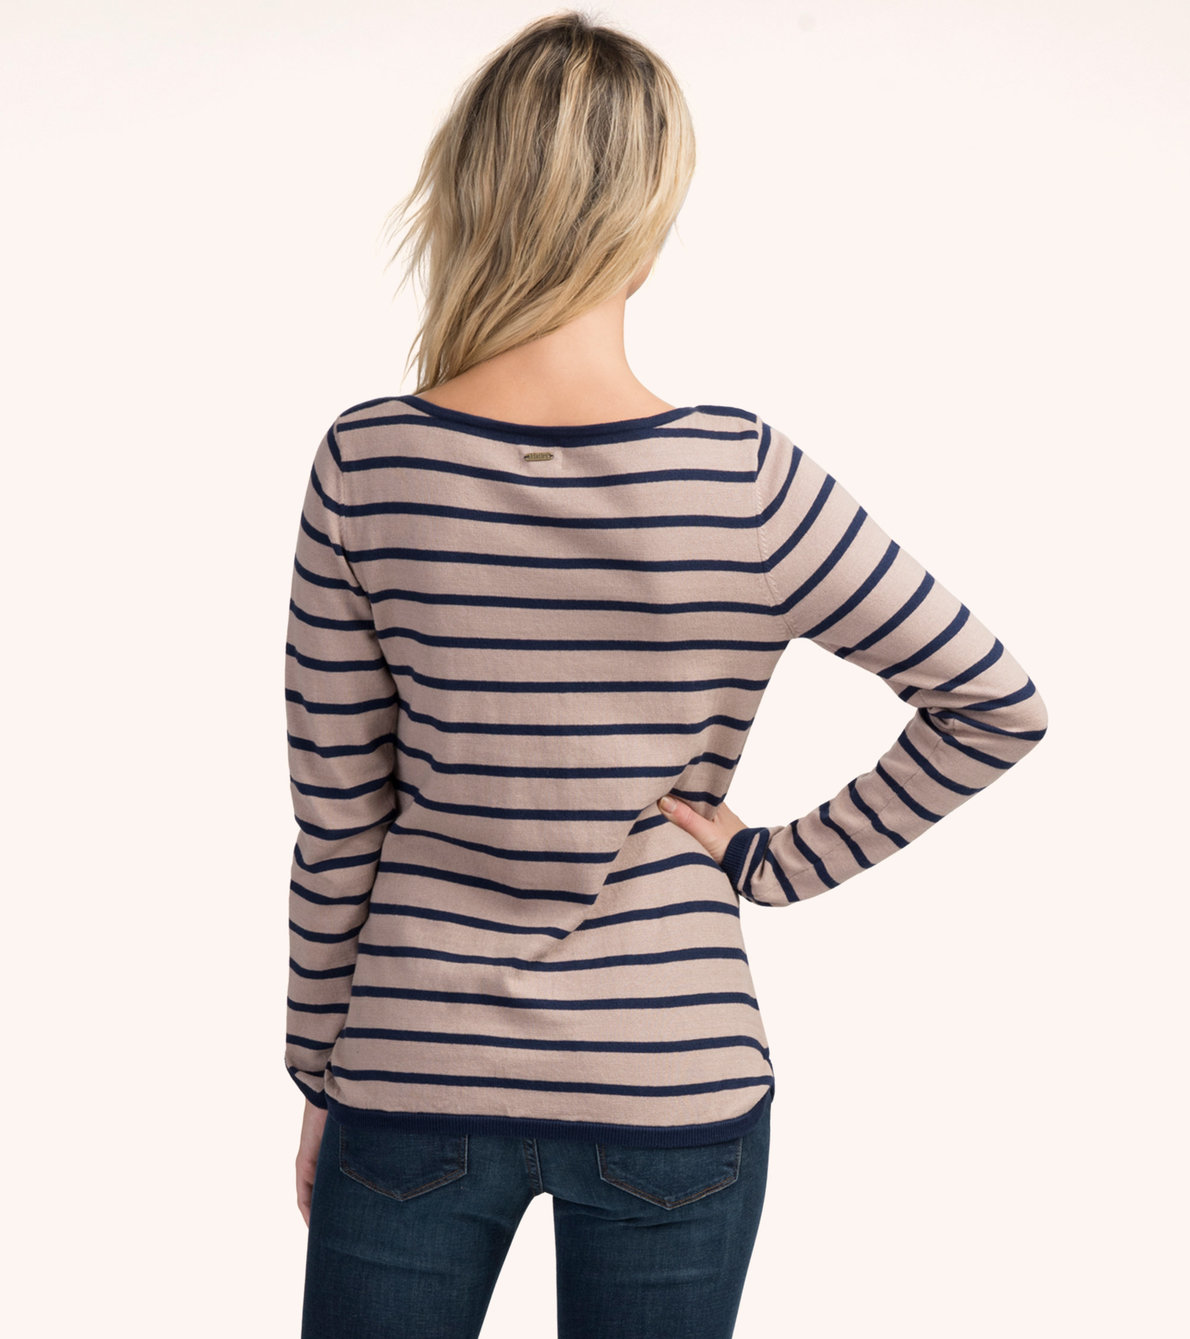 View larger image of Camel and Navy Stripes Breton Top